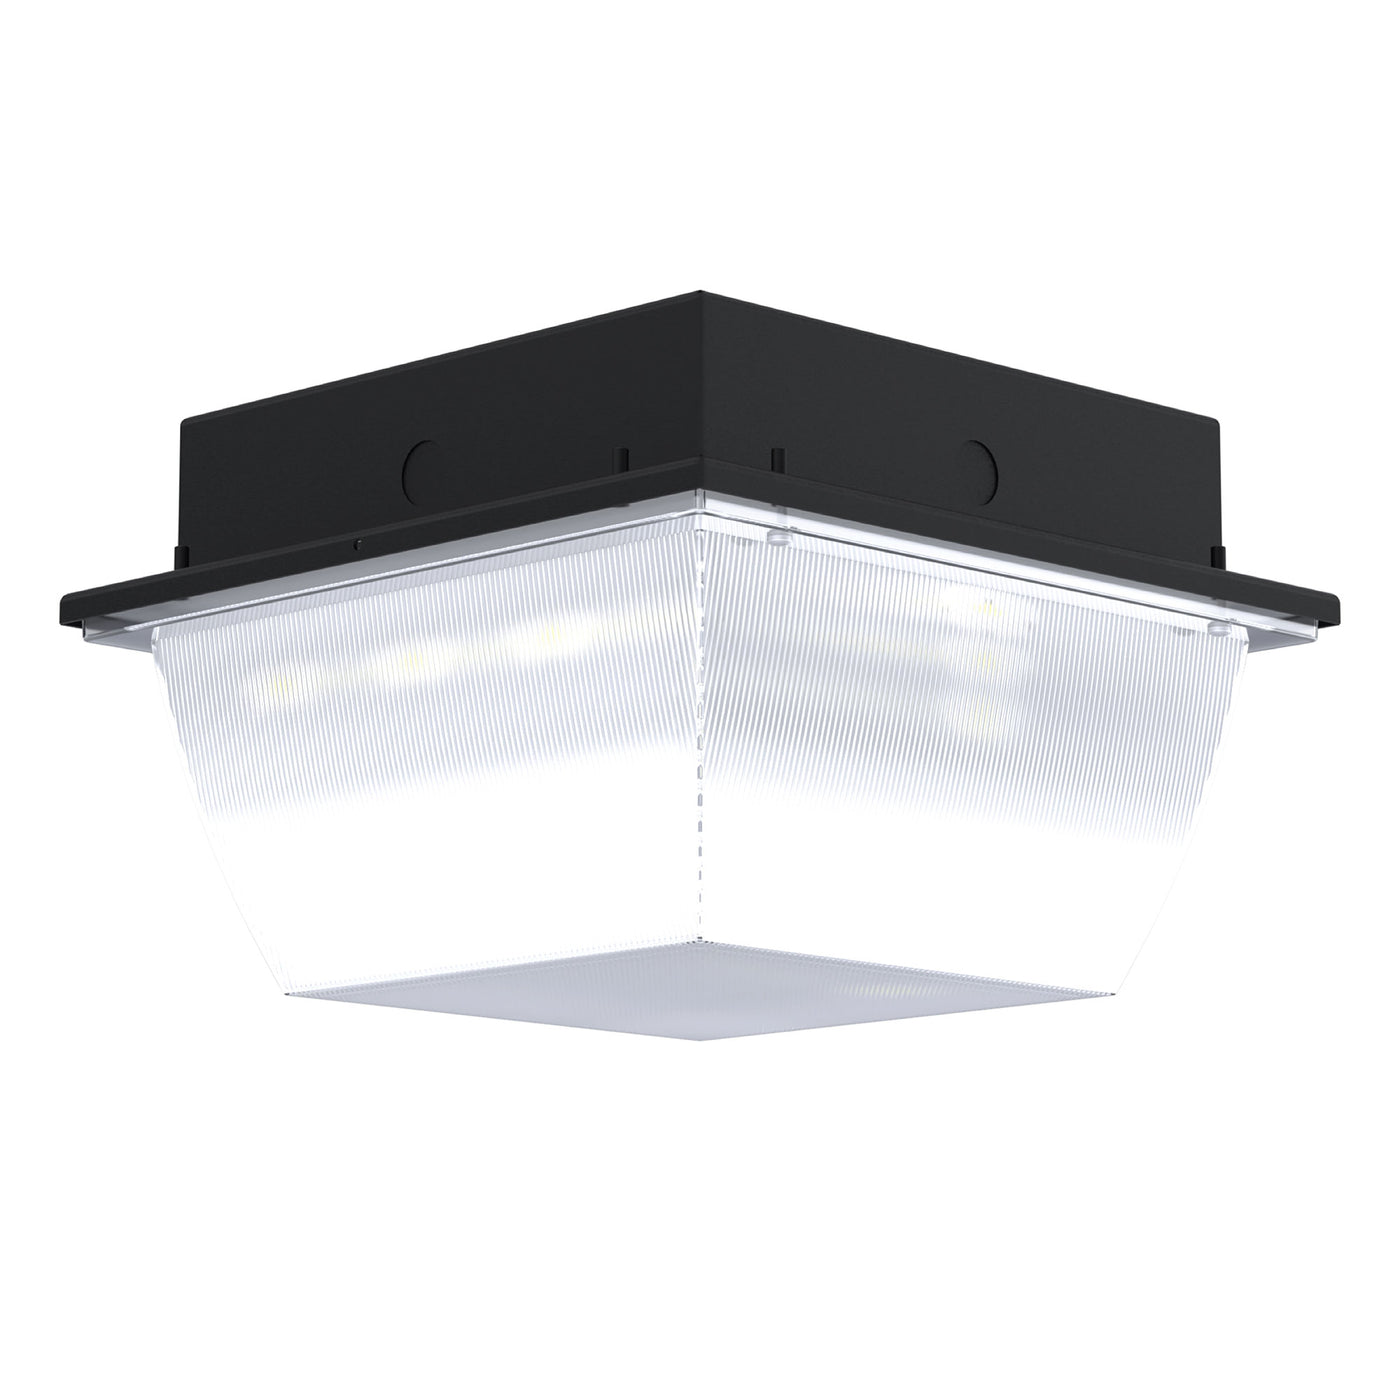 NAFCO CPX Surface Mount Canopy LED Light Fixture